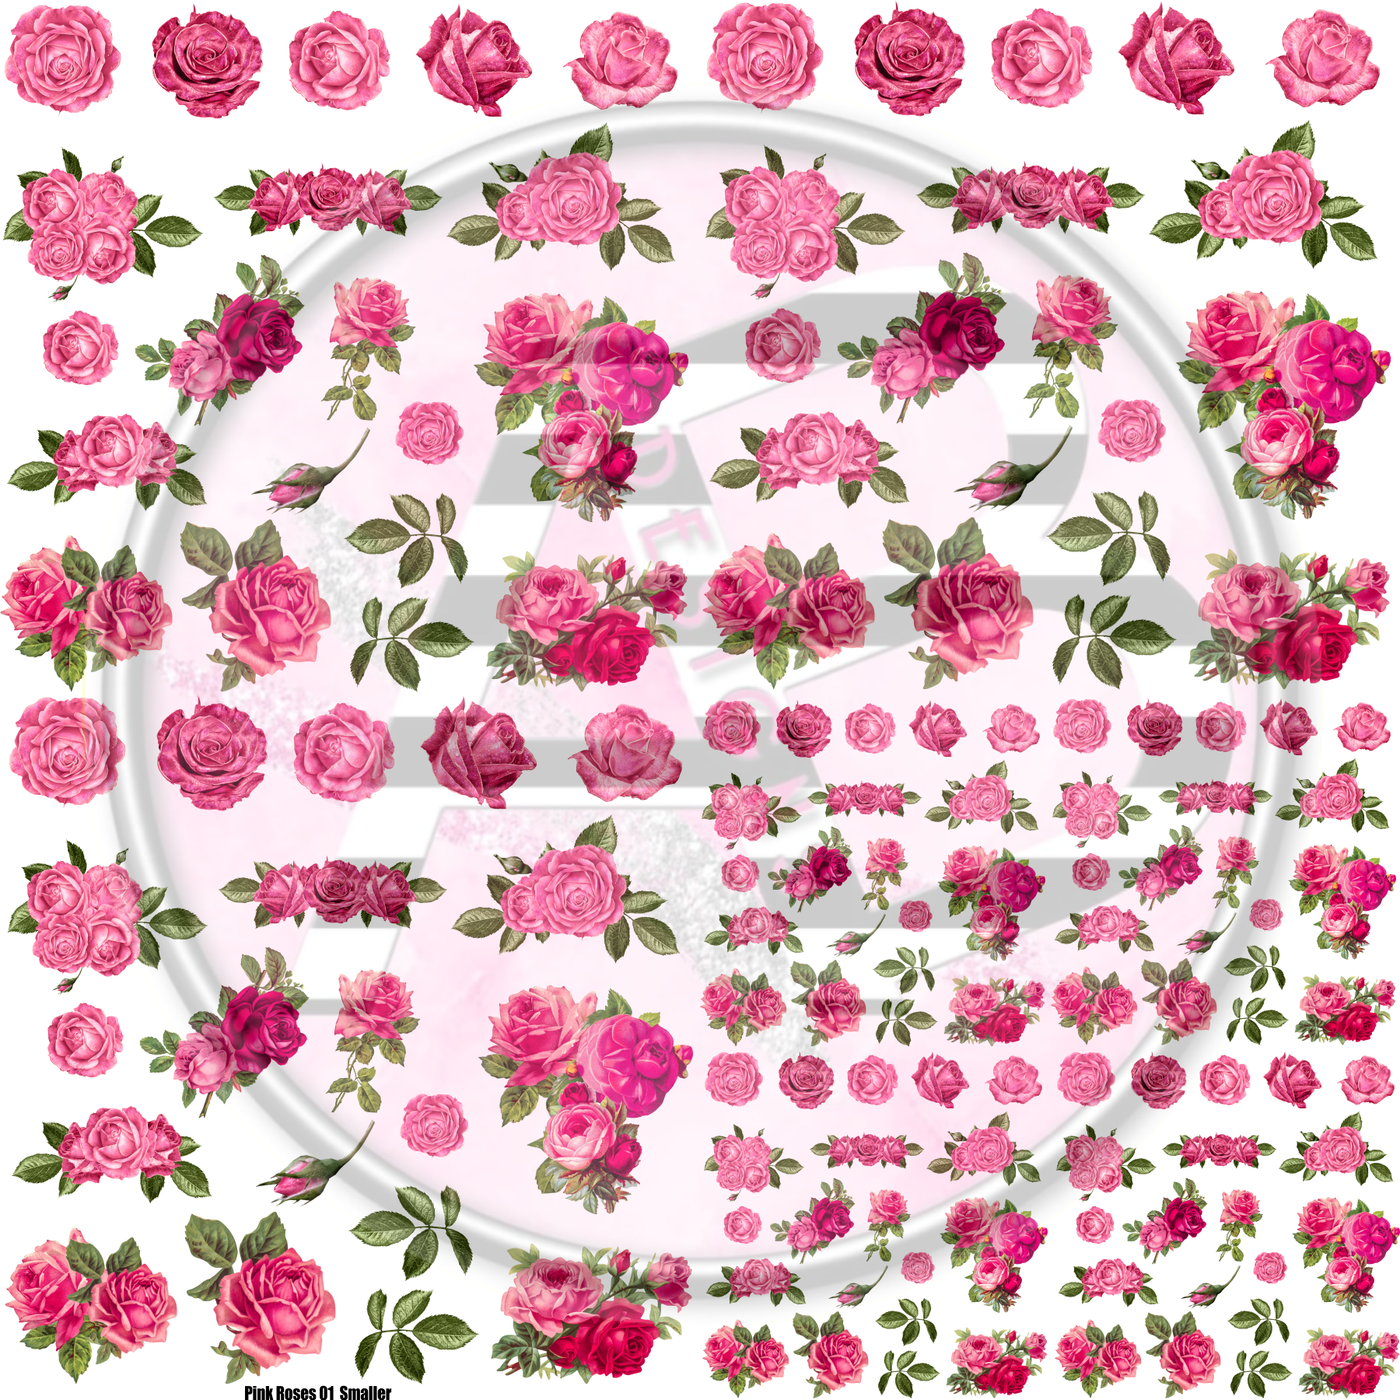 Pink Roses 01 Smaller Full Sheet 12x12 - Clear Cast